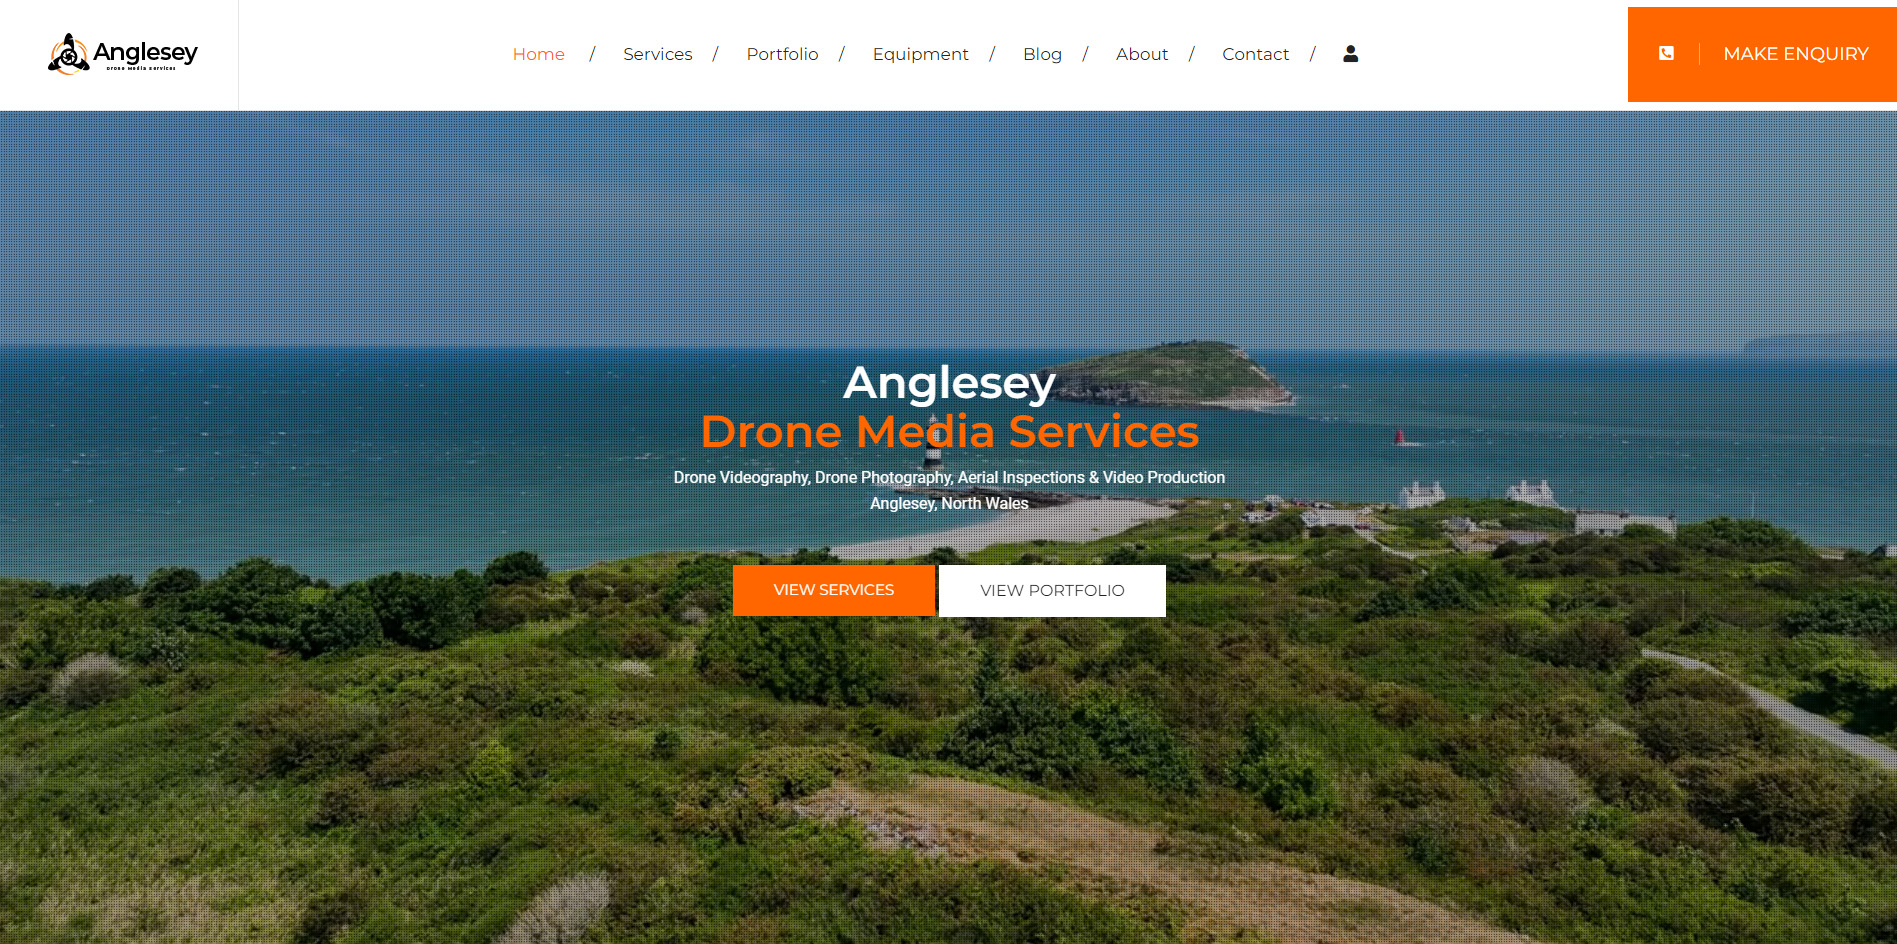 Anglesey Drone Media Services image 1